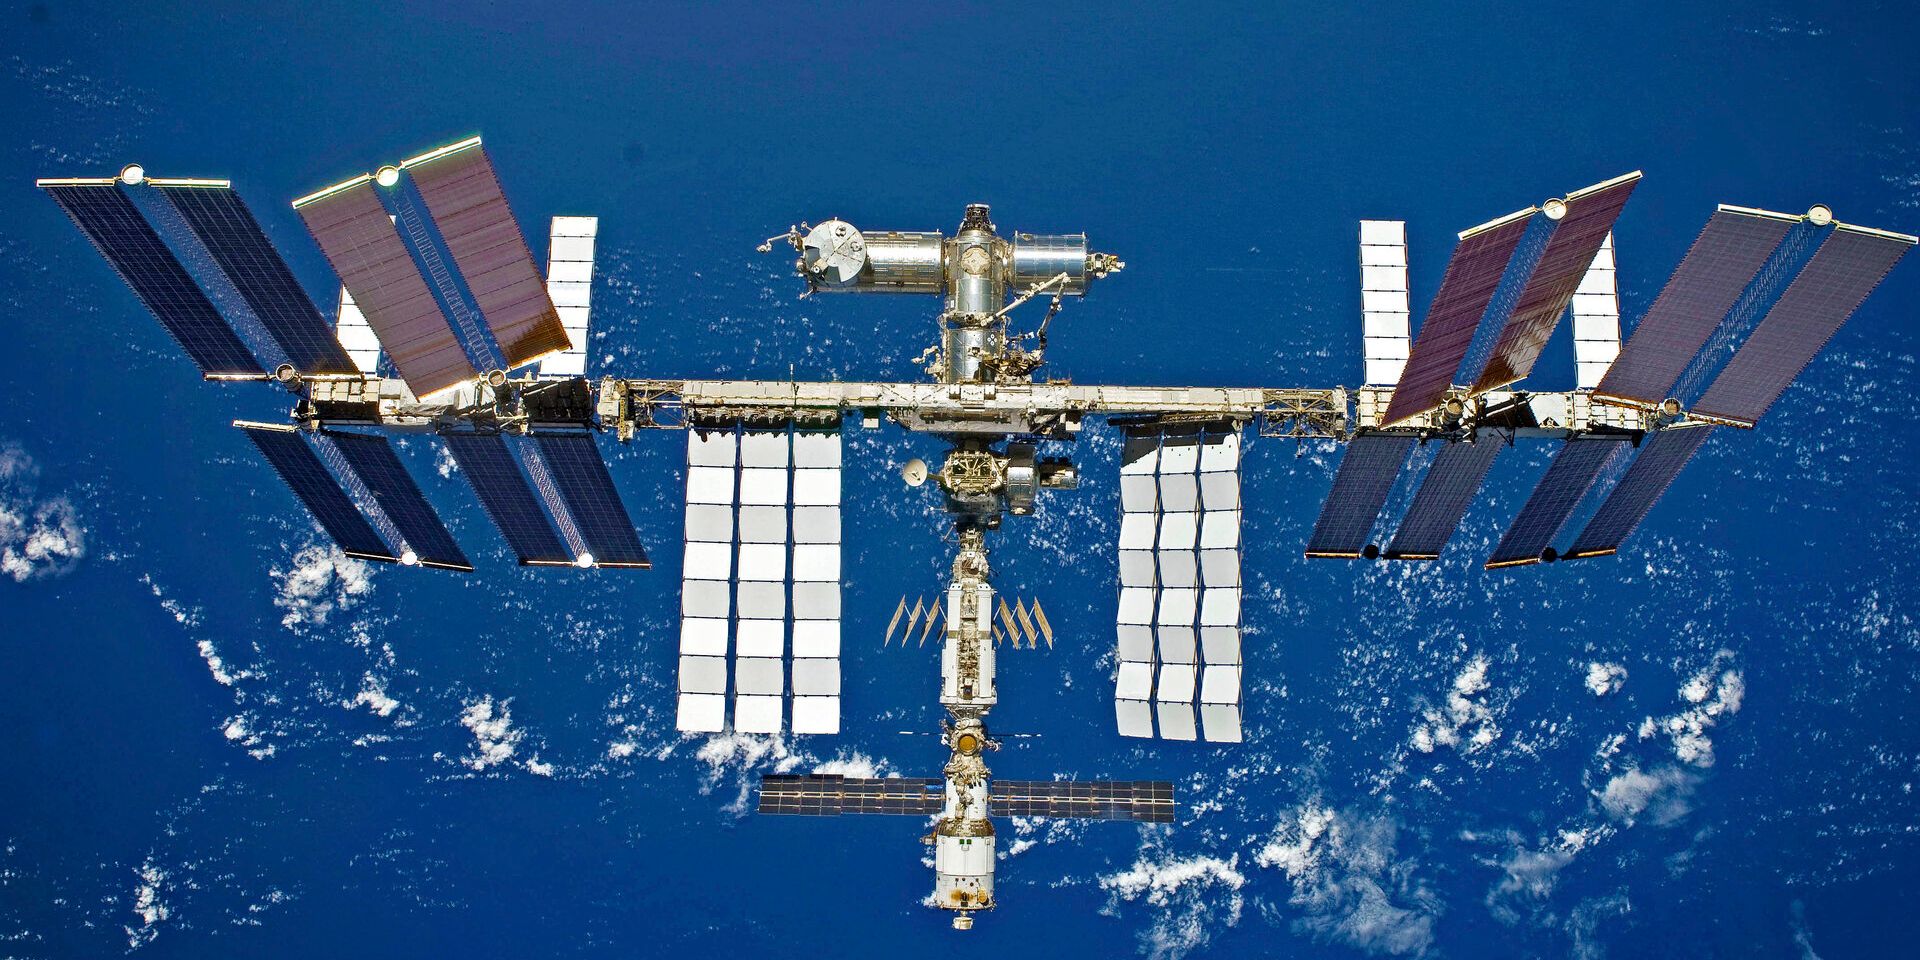 International Space Station above Earth